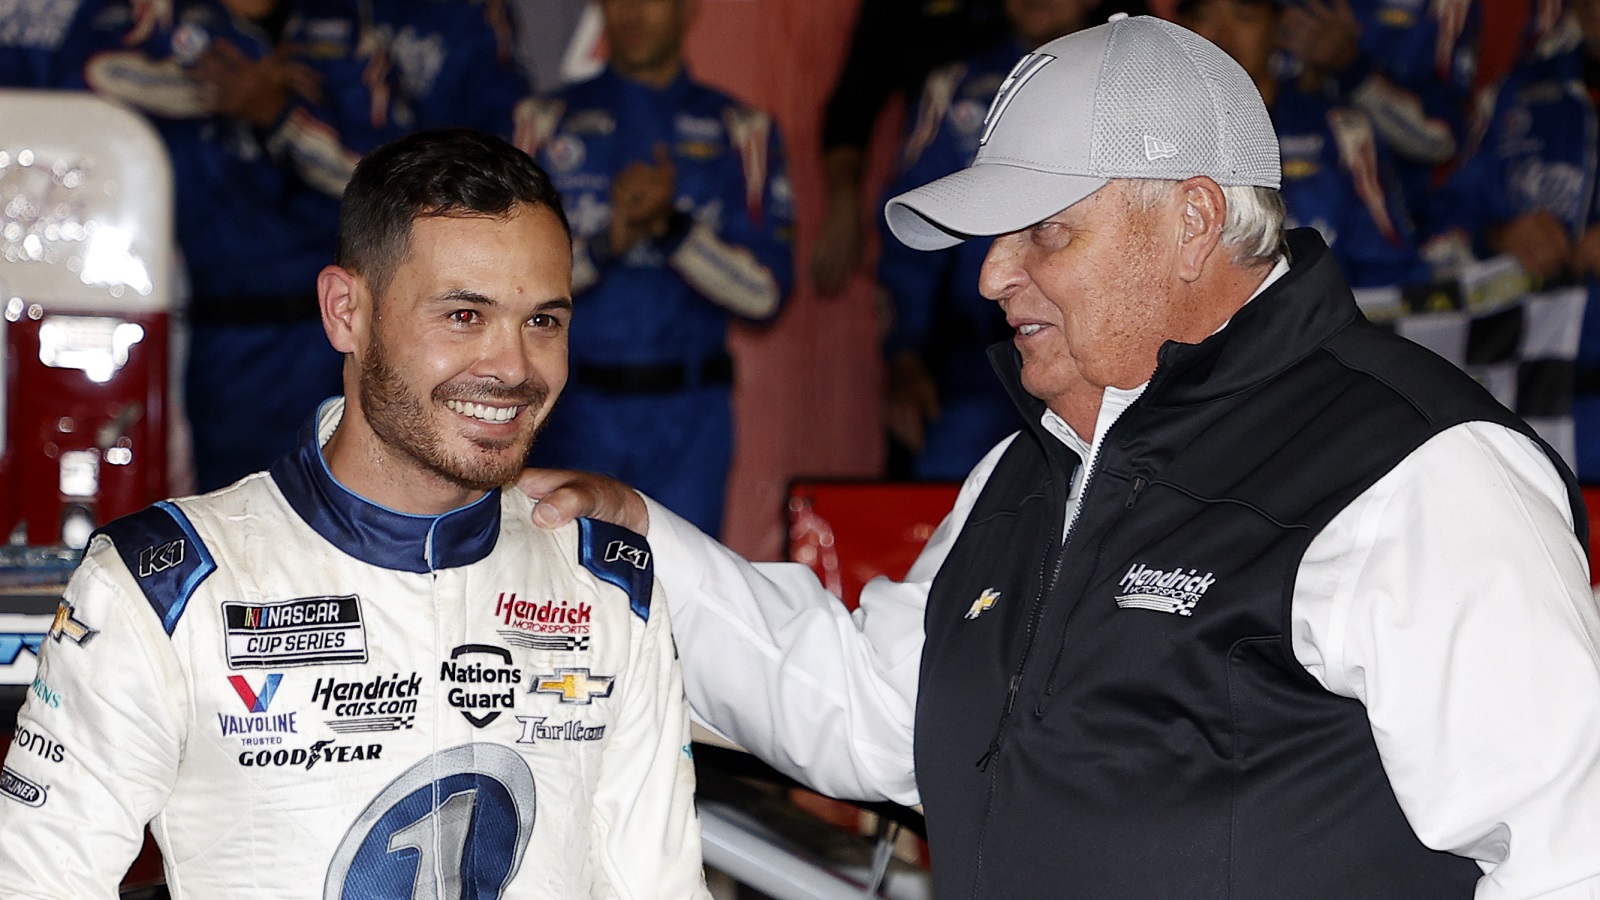 Here’s Why It’ll Be Easy to Root for Kyle Larson in Saturday’s NASCAR Xfinity Series Race